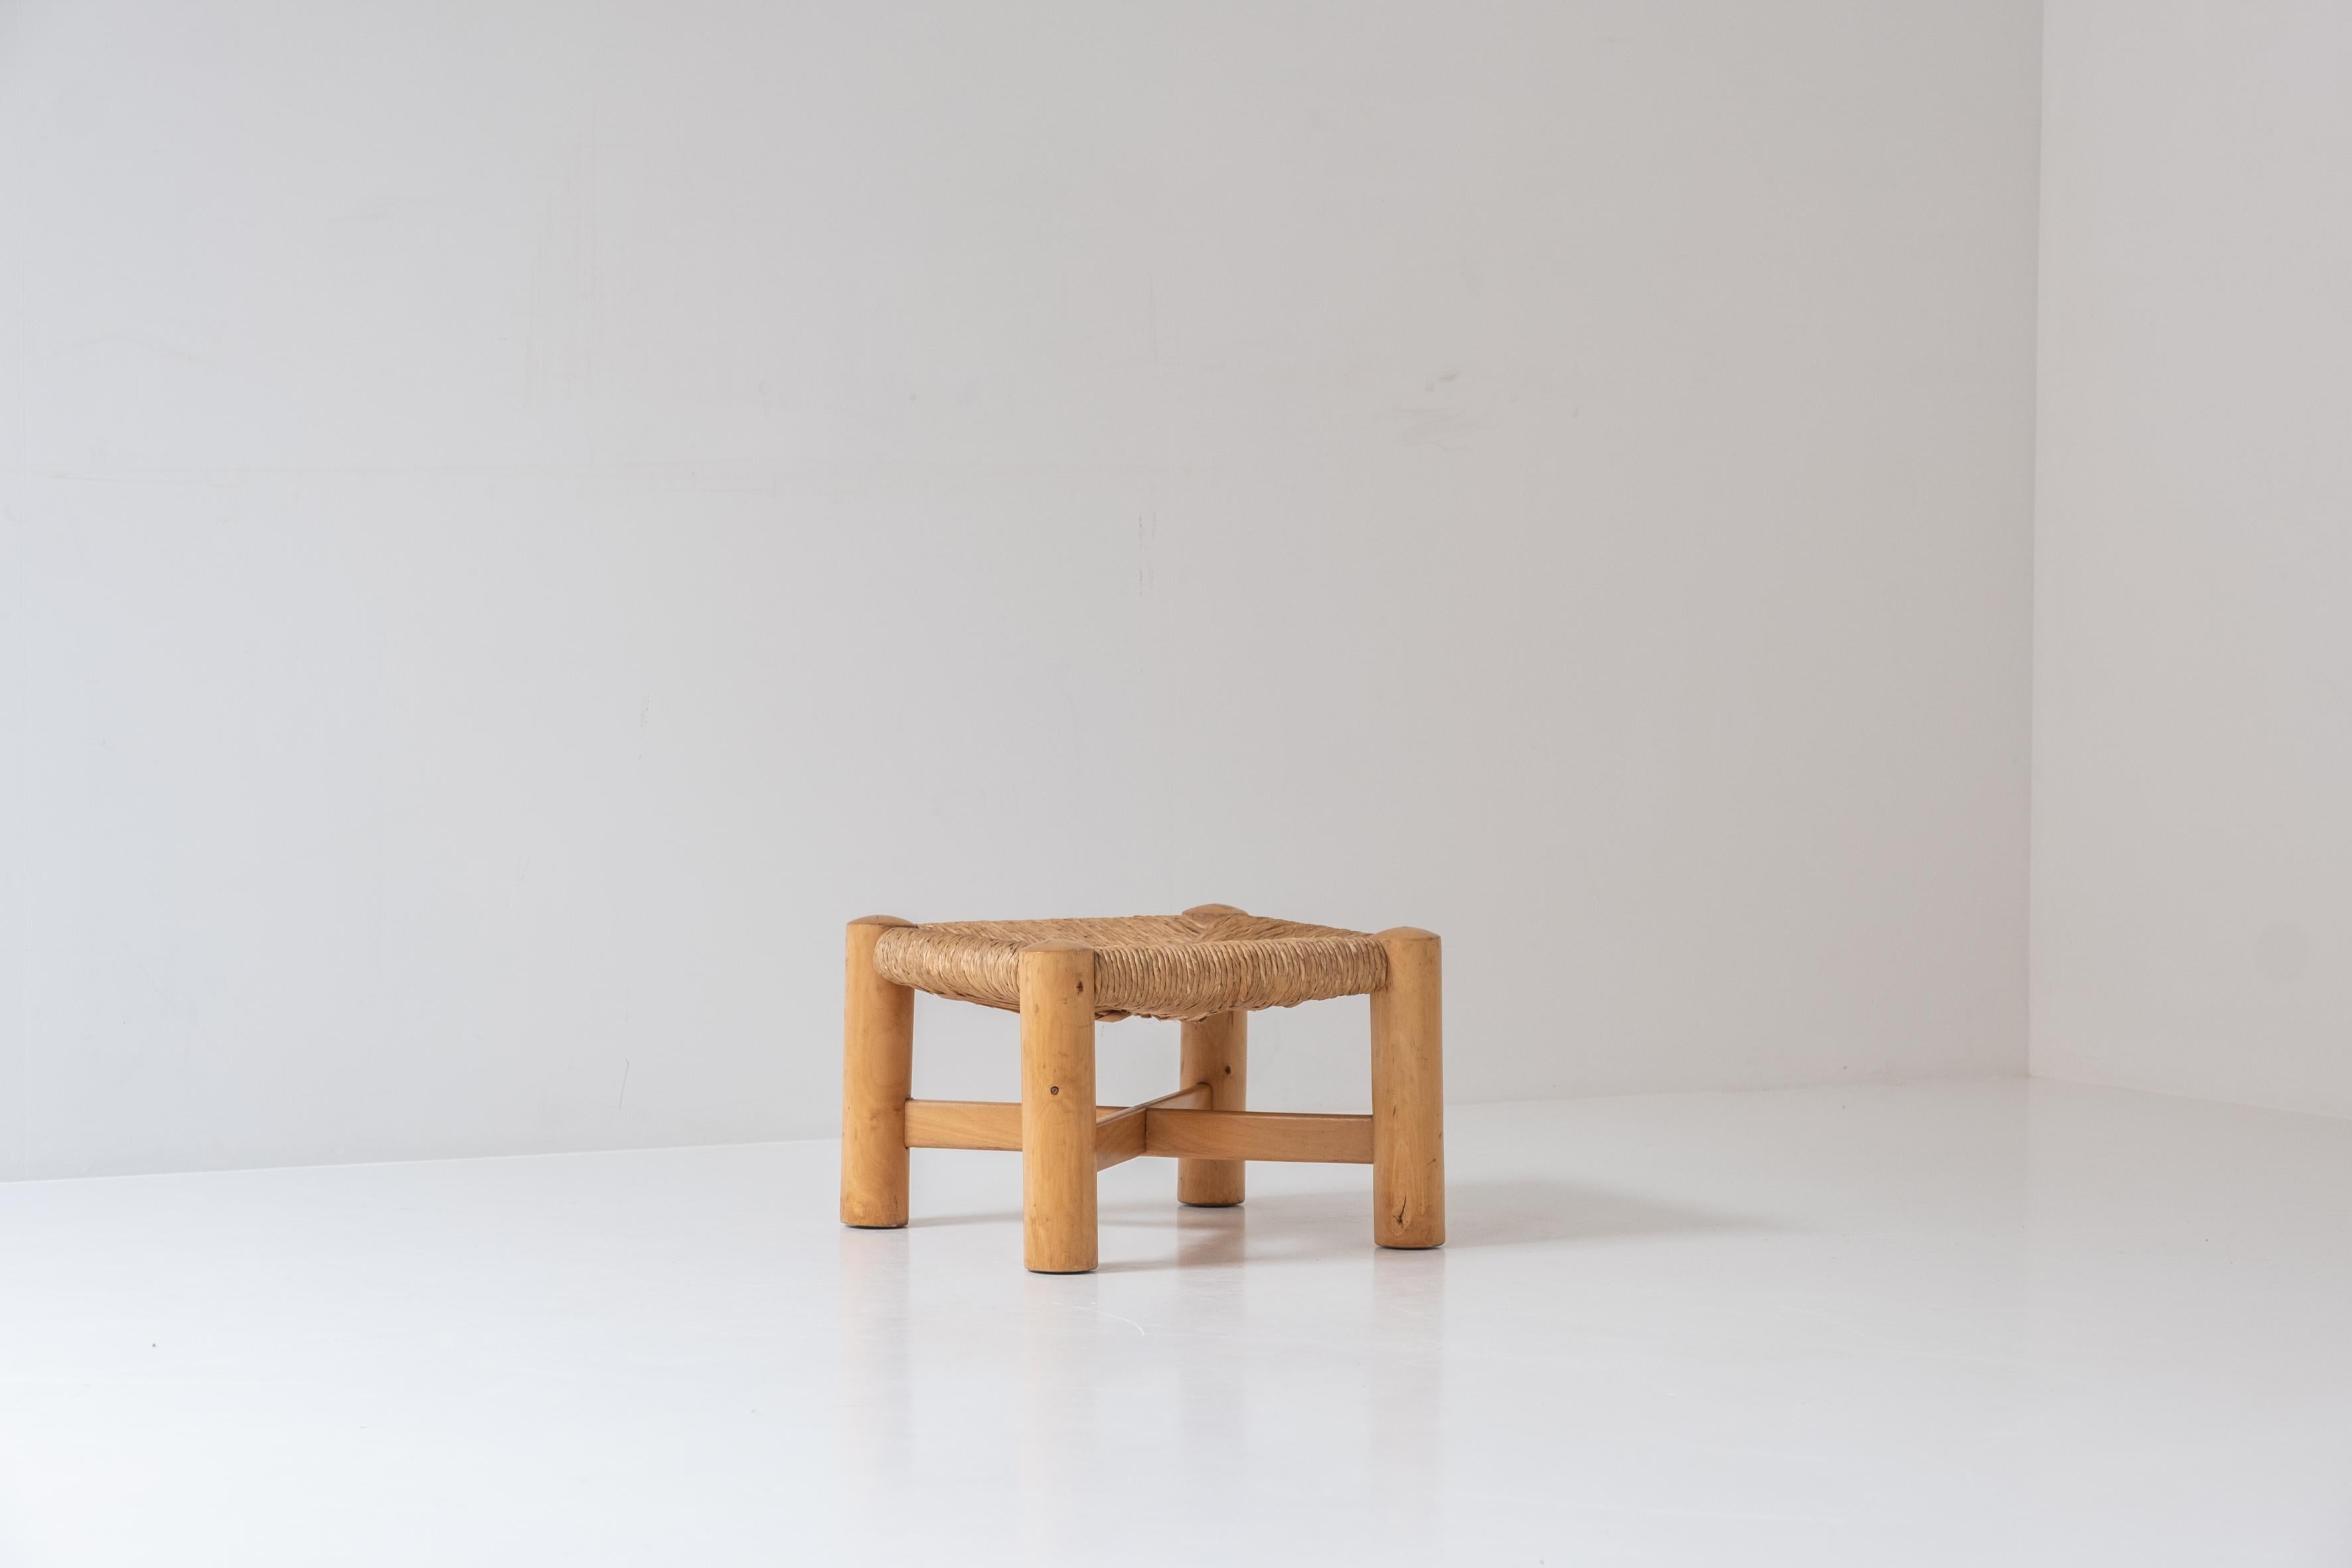 Nice low rush stool by Wim den Boon, designed and manufactured in the Netherlands during the 1950s. This piece is made out off a solid beech wood base and rush seat. The stool is in a very good authentic condition with only minor wear from age and